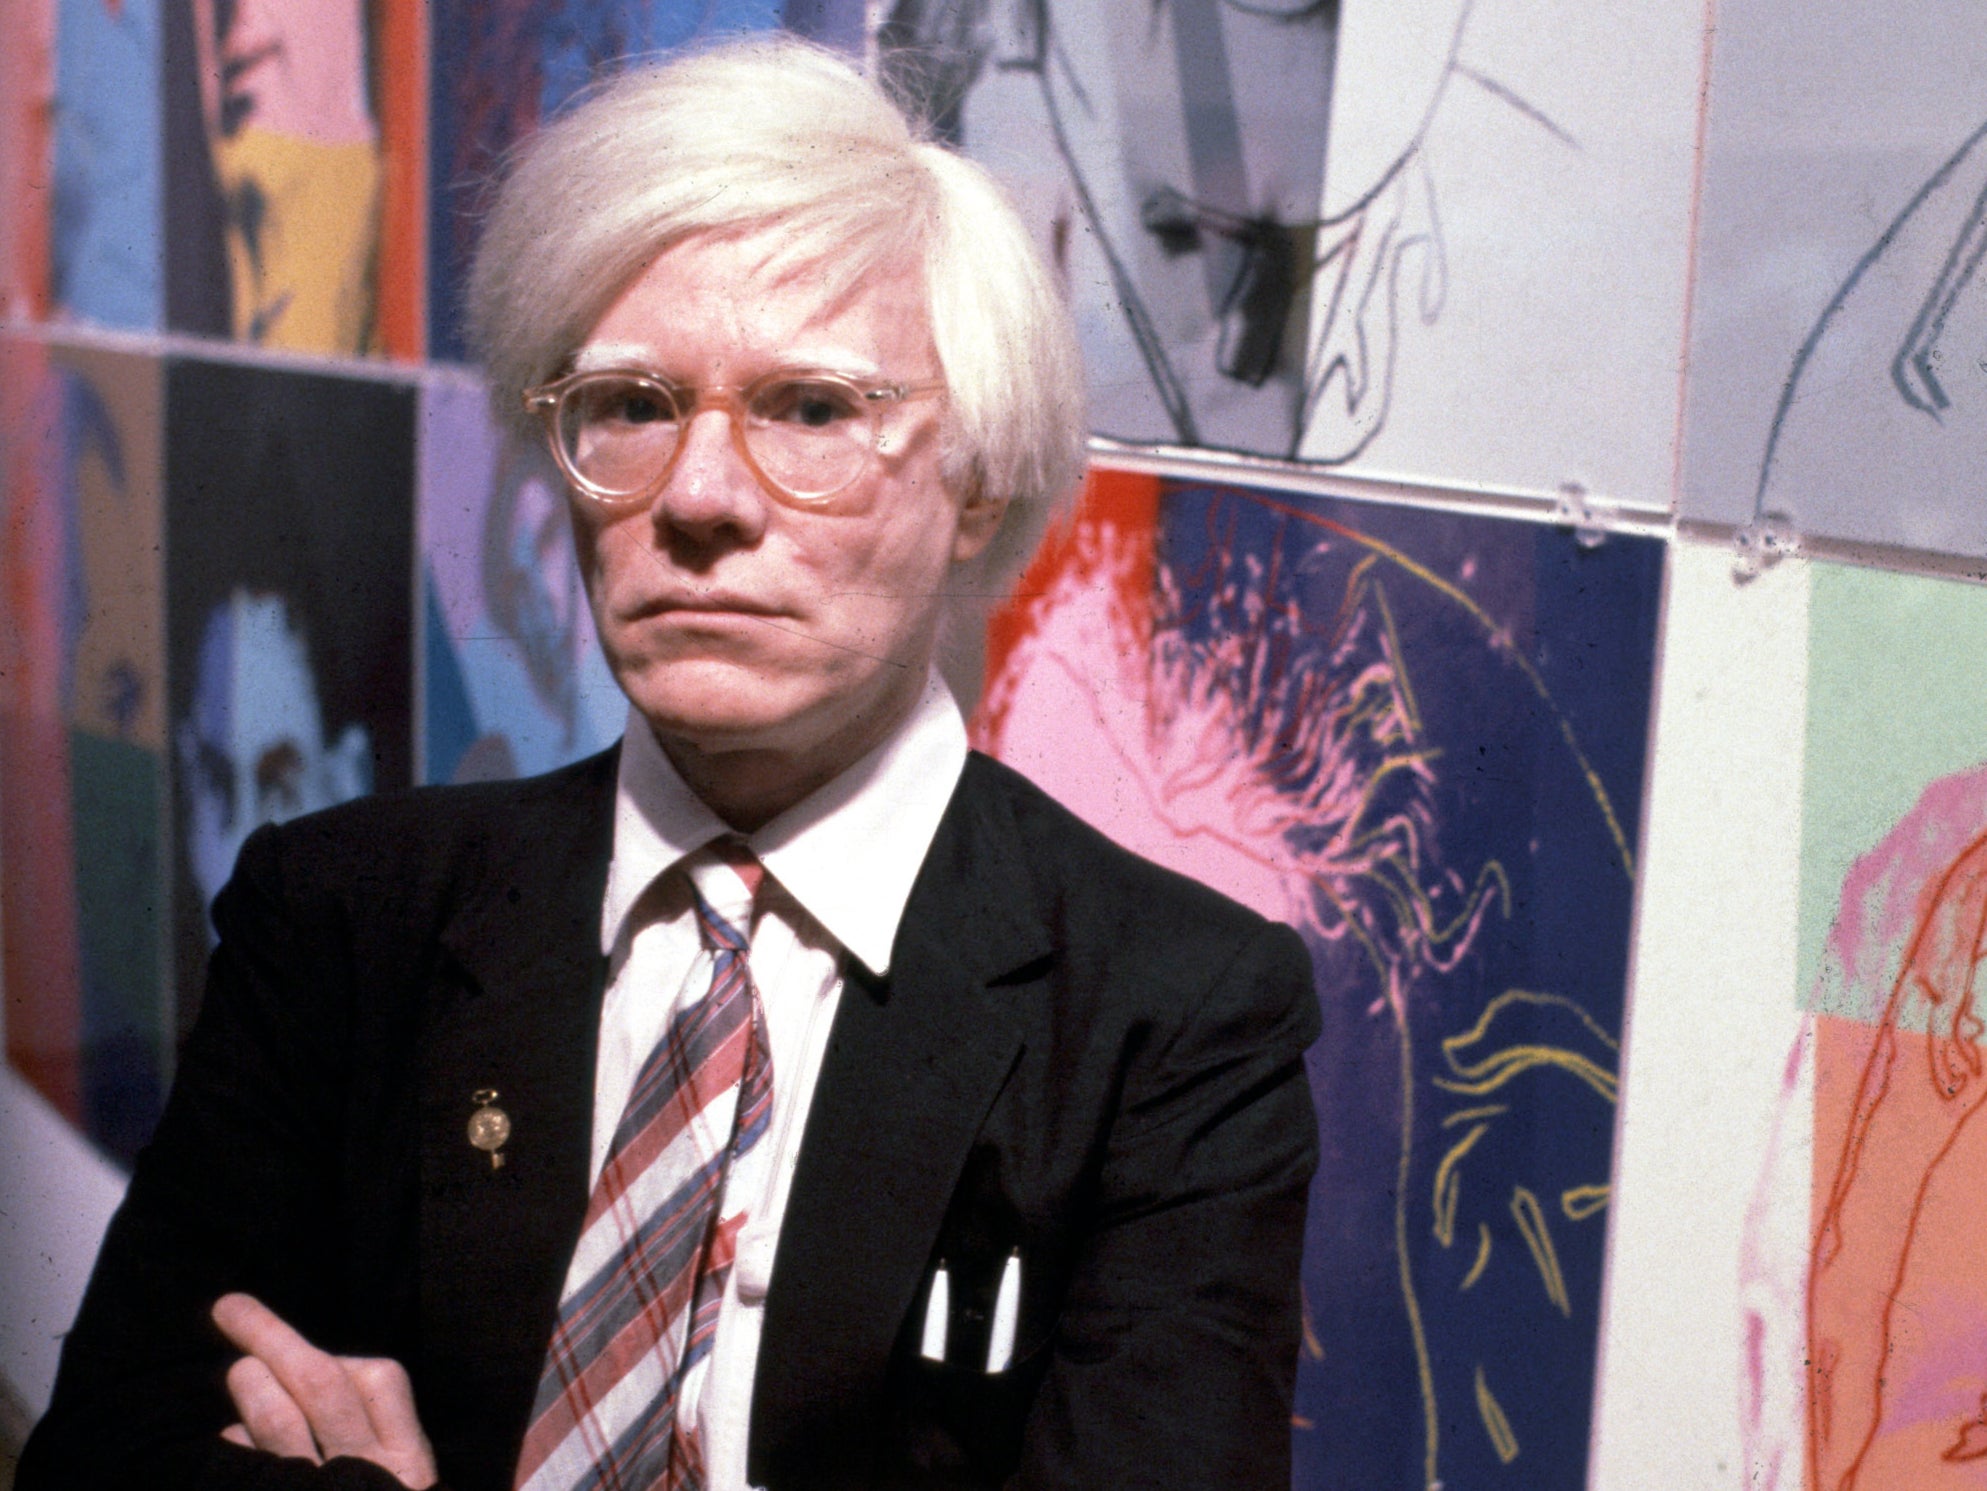 Andy Warhol in December 1980